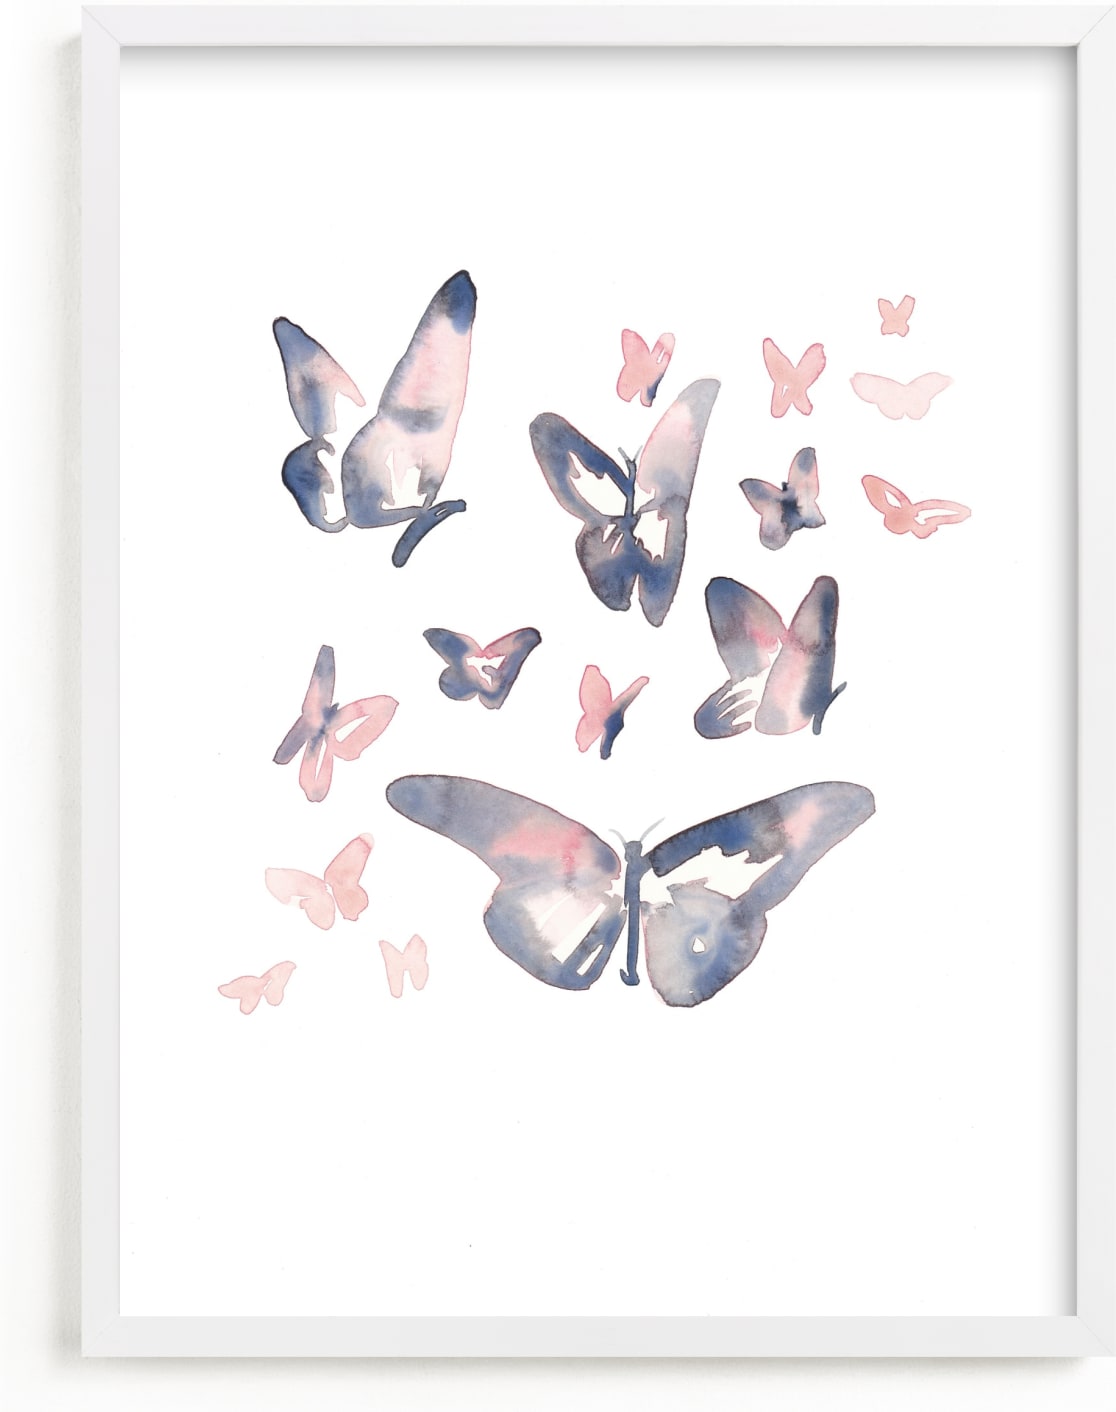 This is a blue kids wall art by Jocelyn Edin called Papillons.